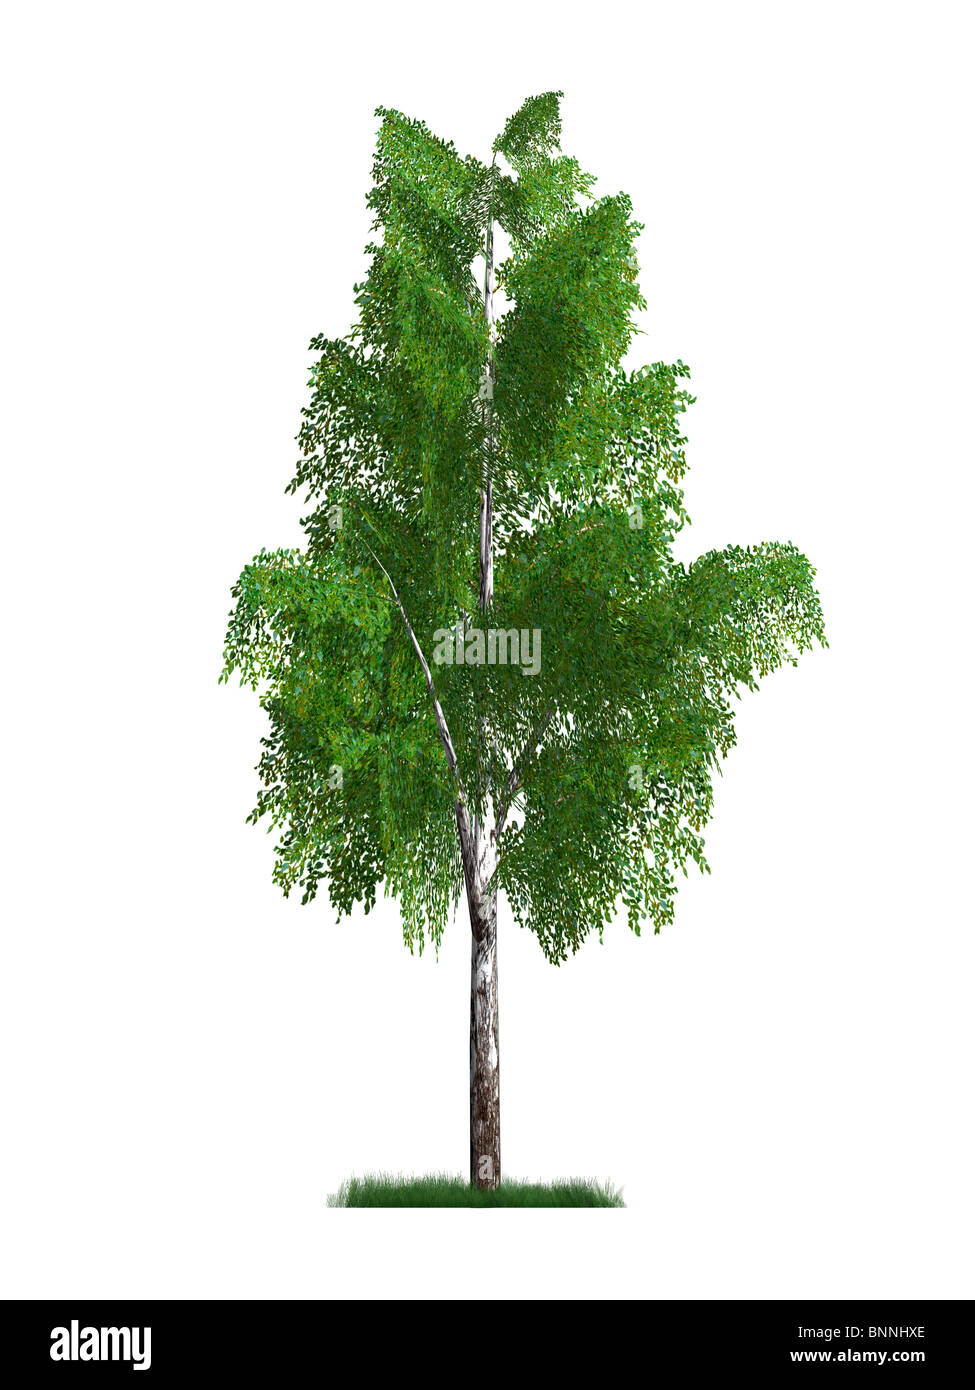 3D model of a birch tree isolated on white background Stock Photo